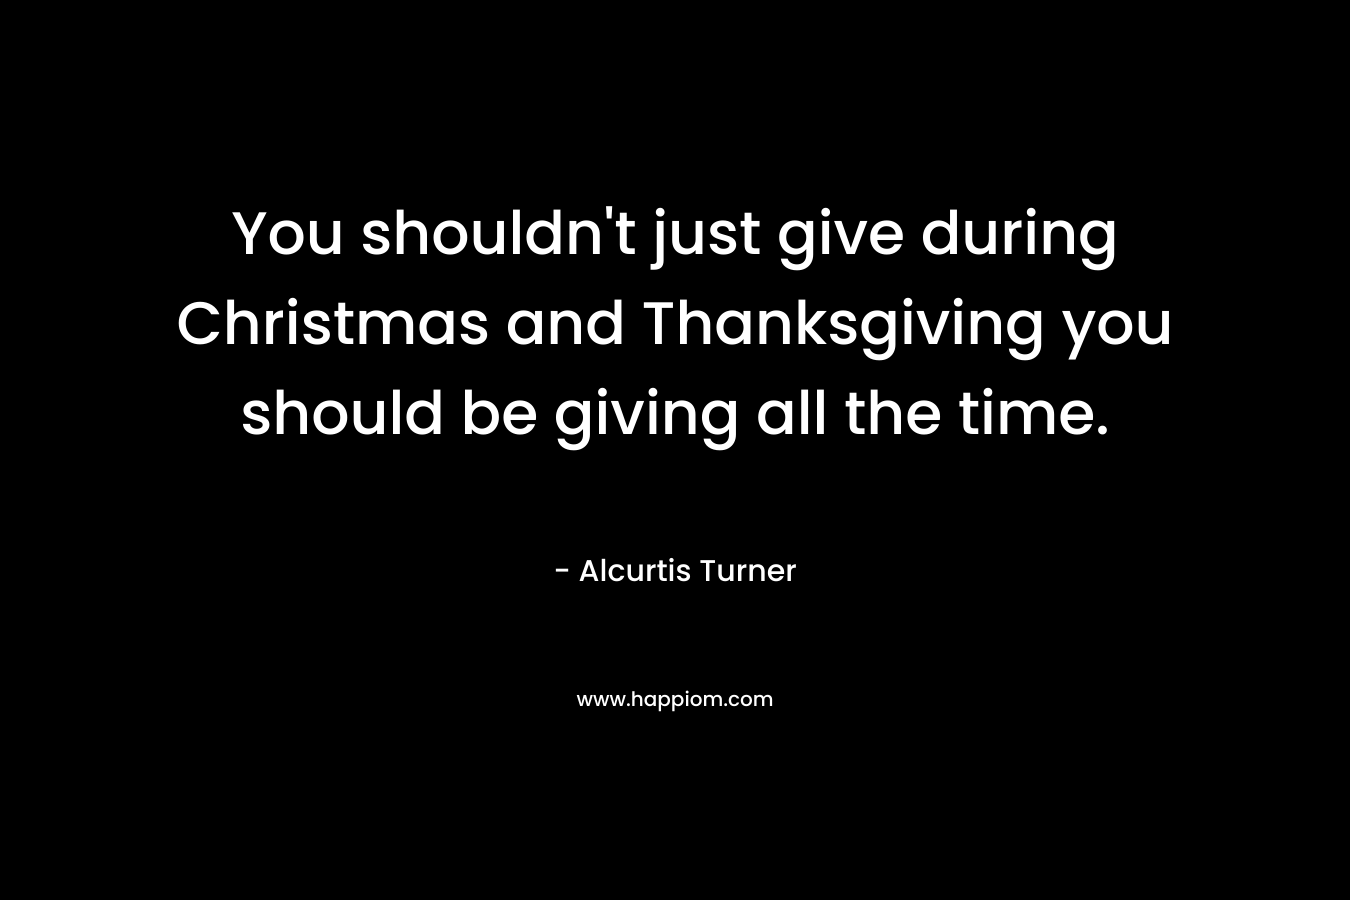 You shouldn’t just give during Christmas and Thanksgiving you should be giving all the time. – Alcurtis Turner